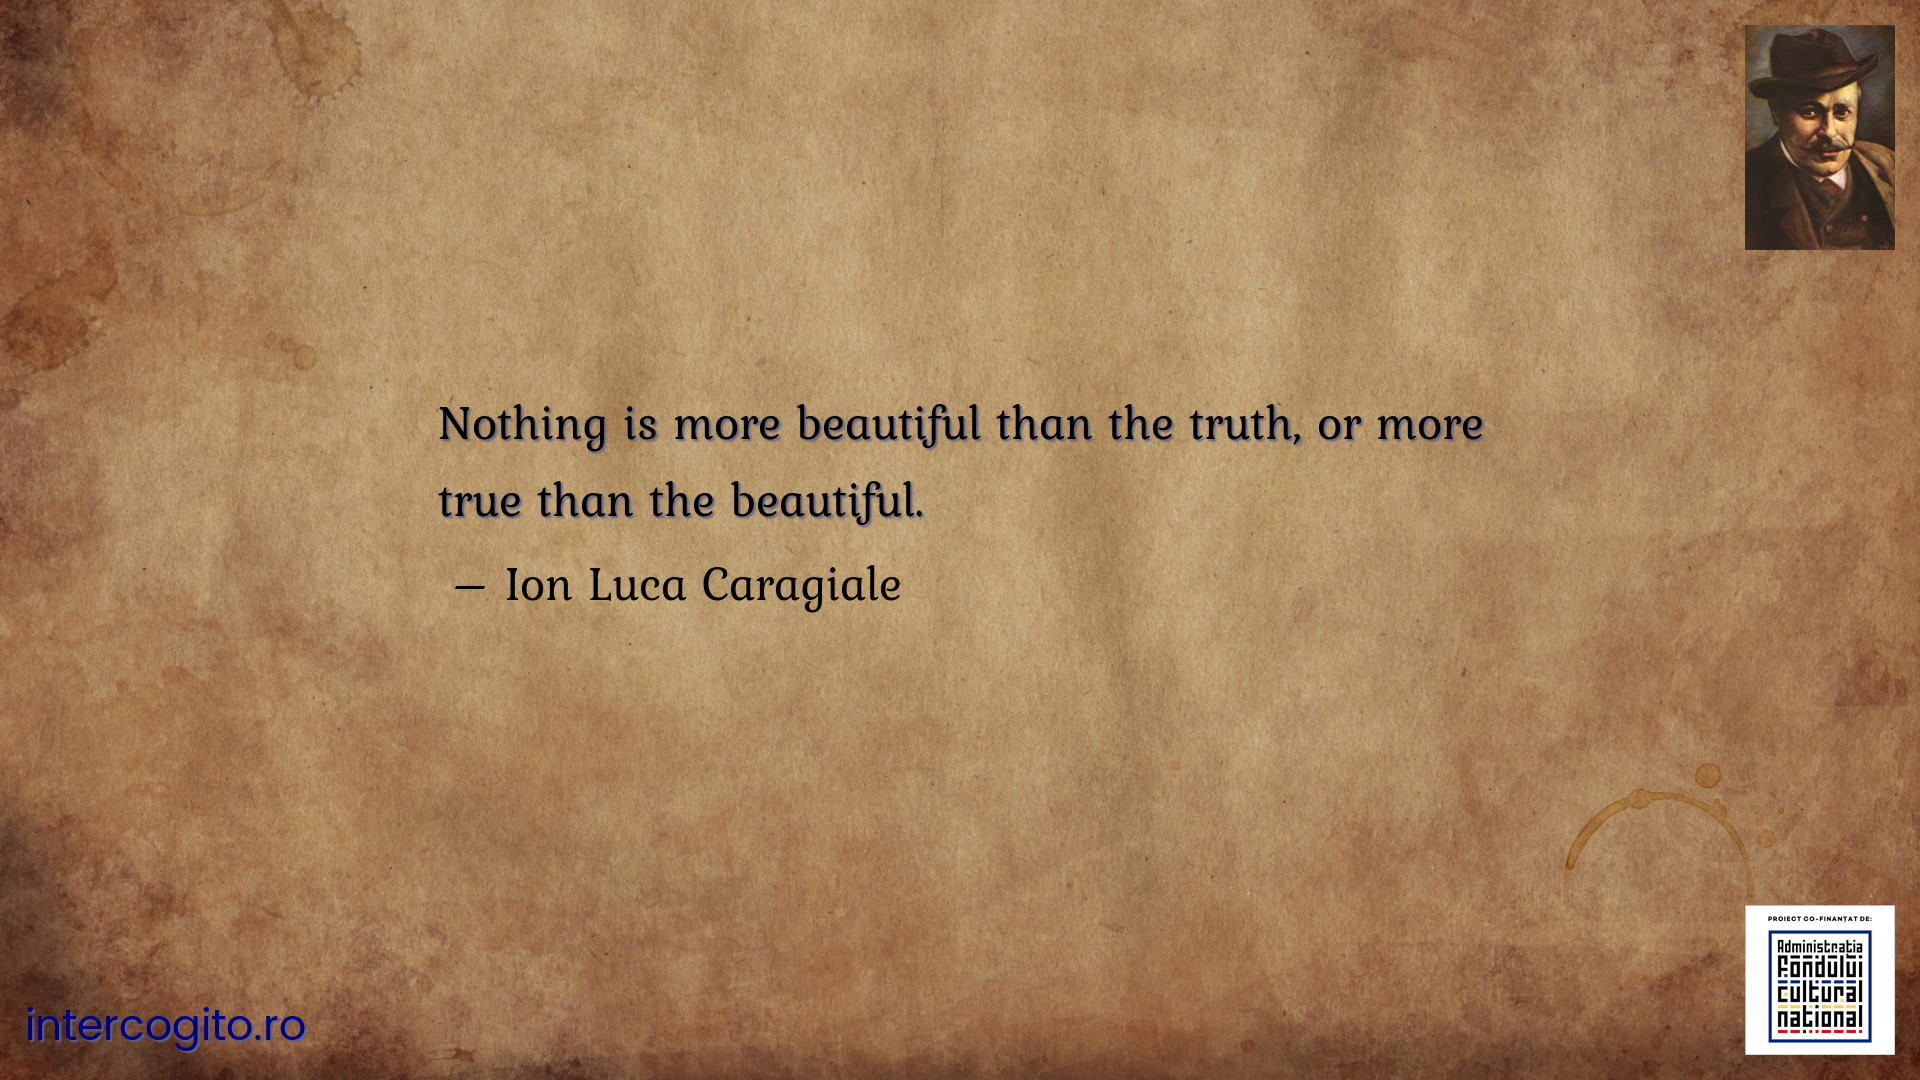 Nothing is more beautiful than the truth, or more true than the beautiful.